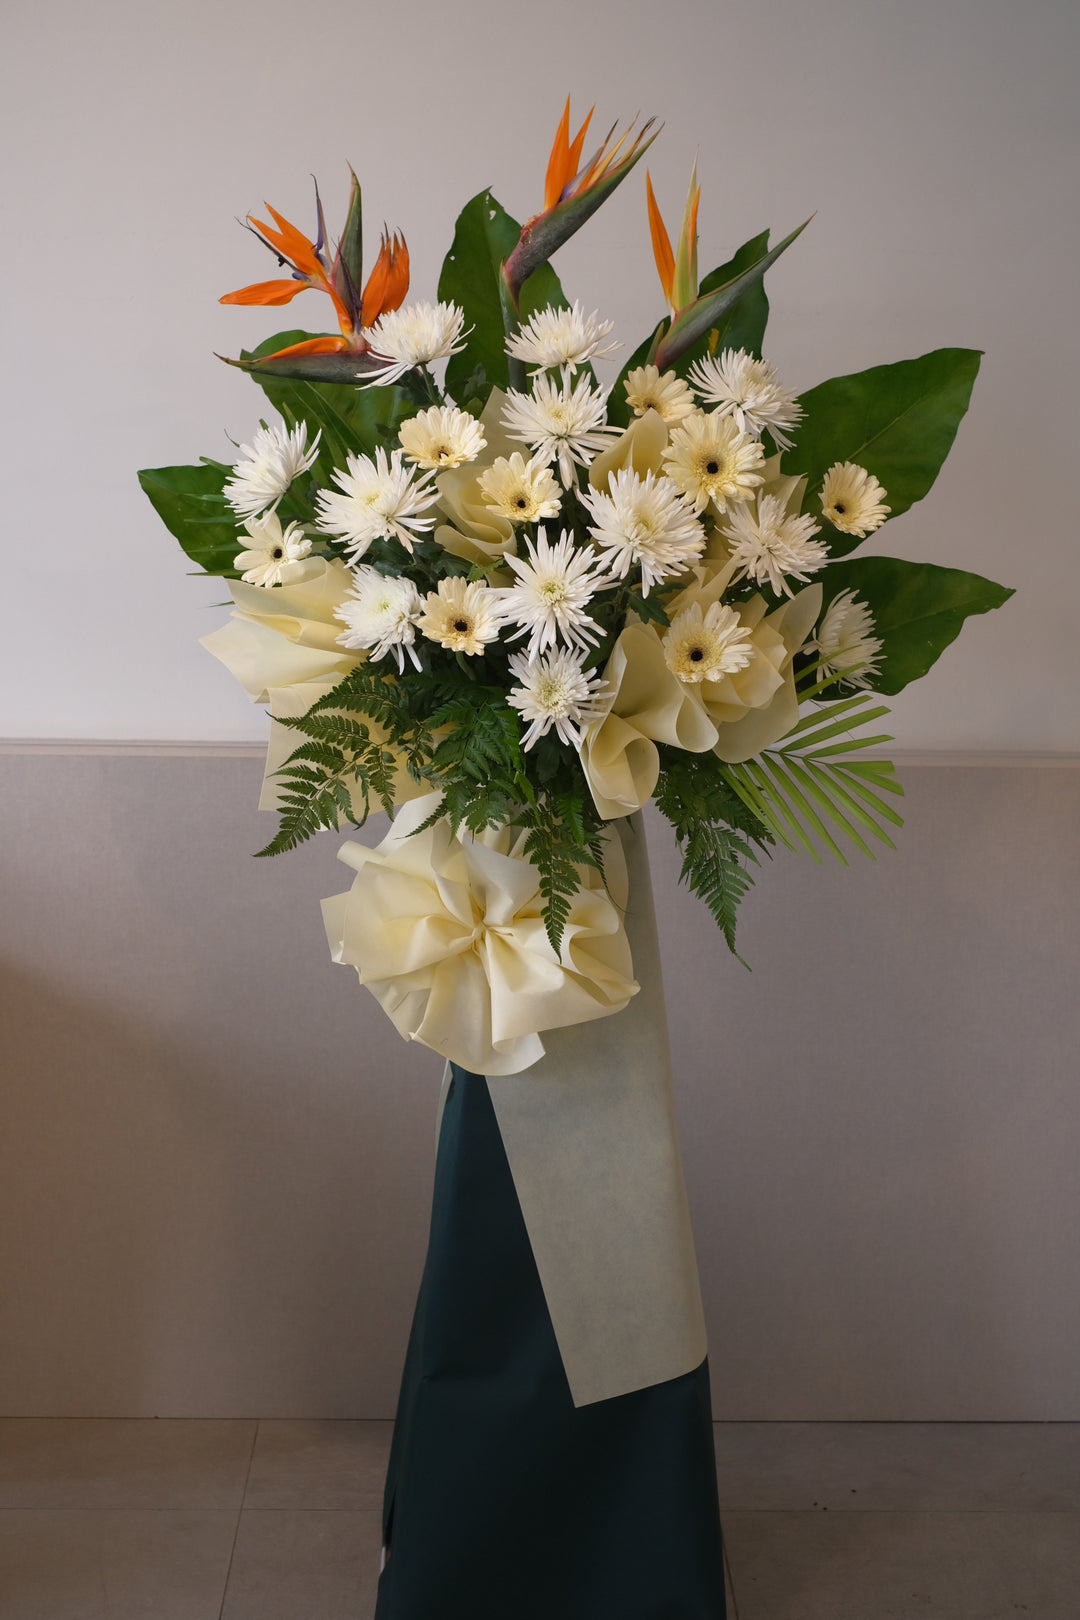 Send your heartfelt condolences through this ethereal arrangement. For same day condolences flowers delivery in Penang.  